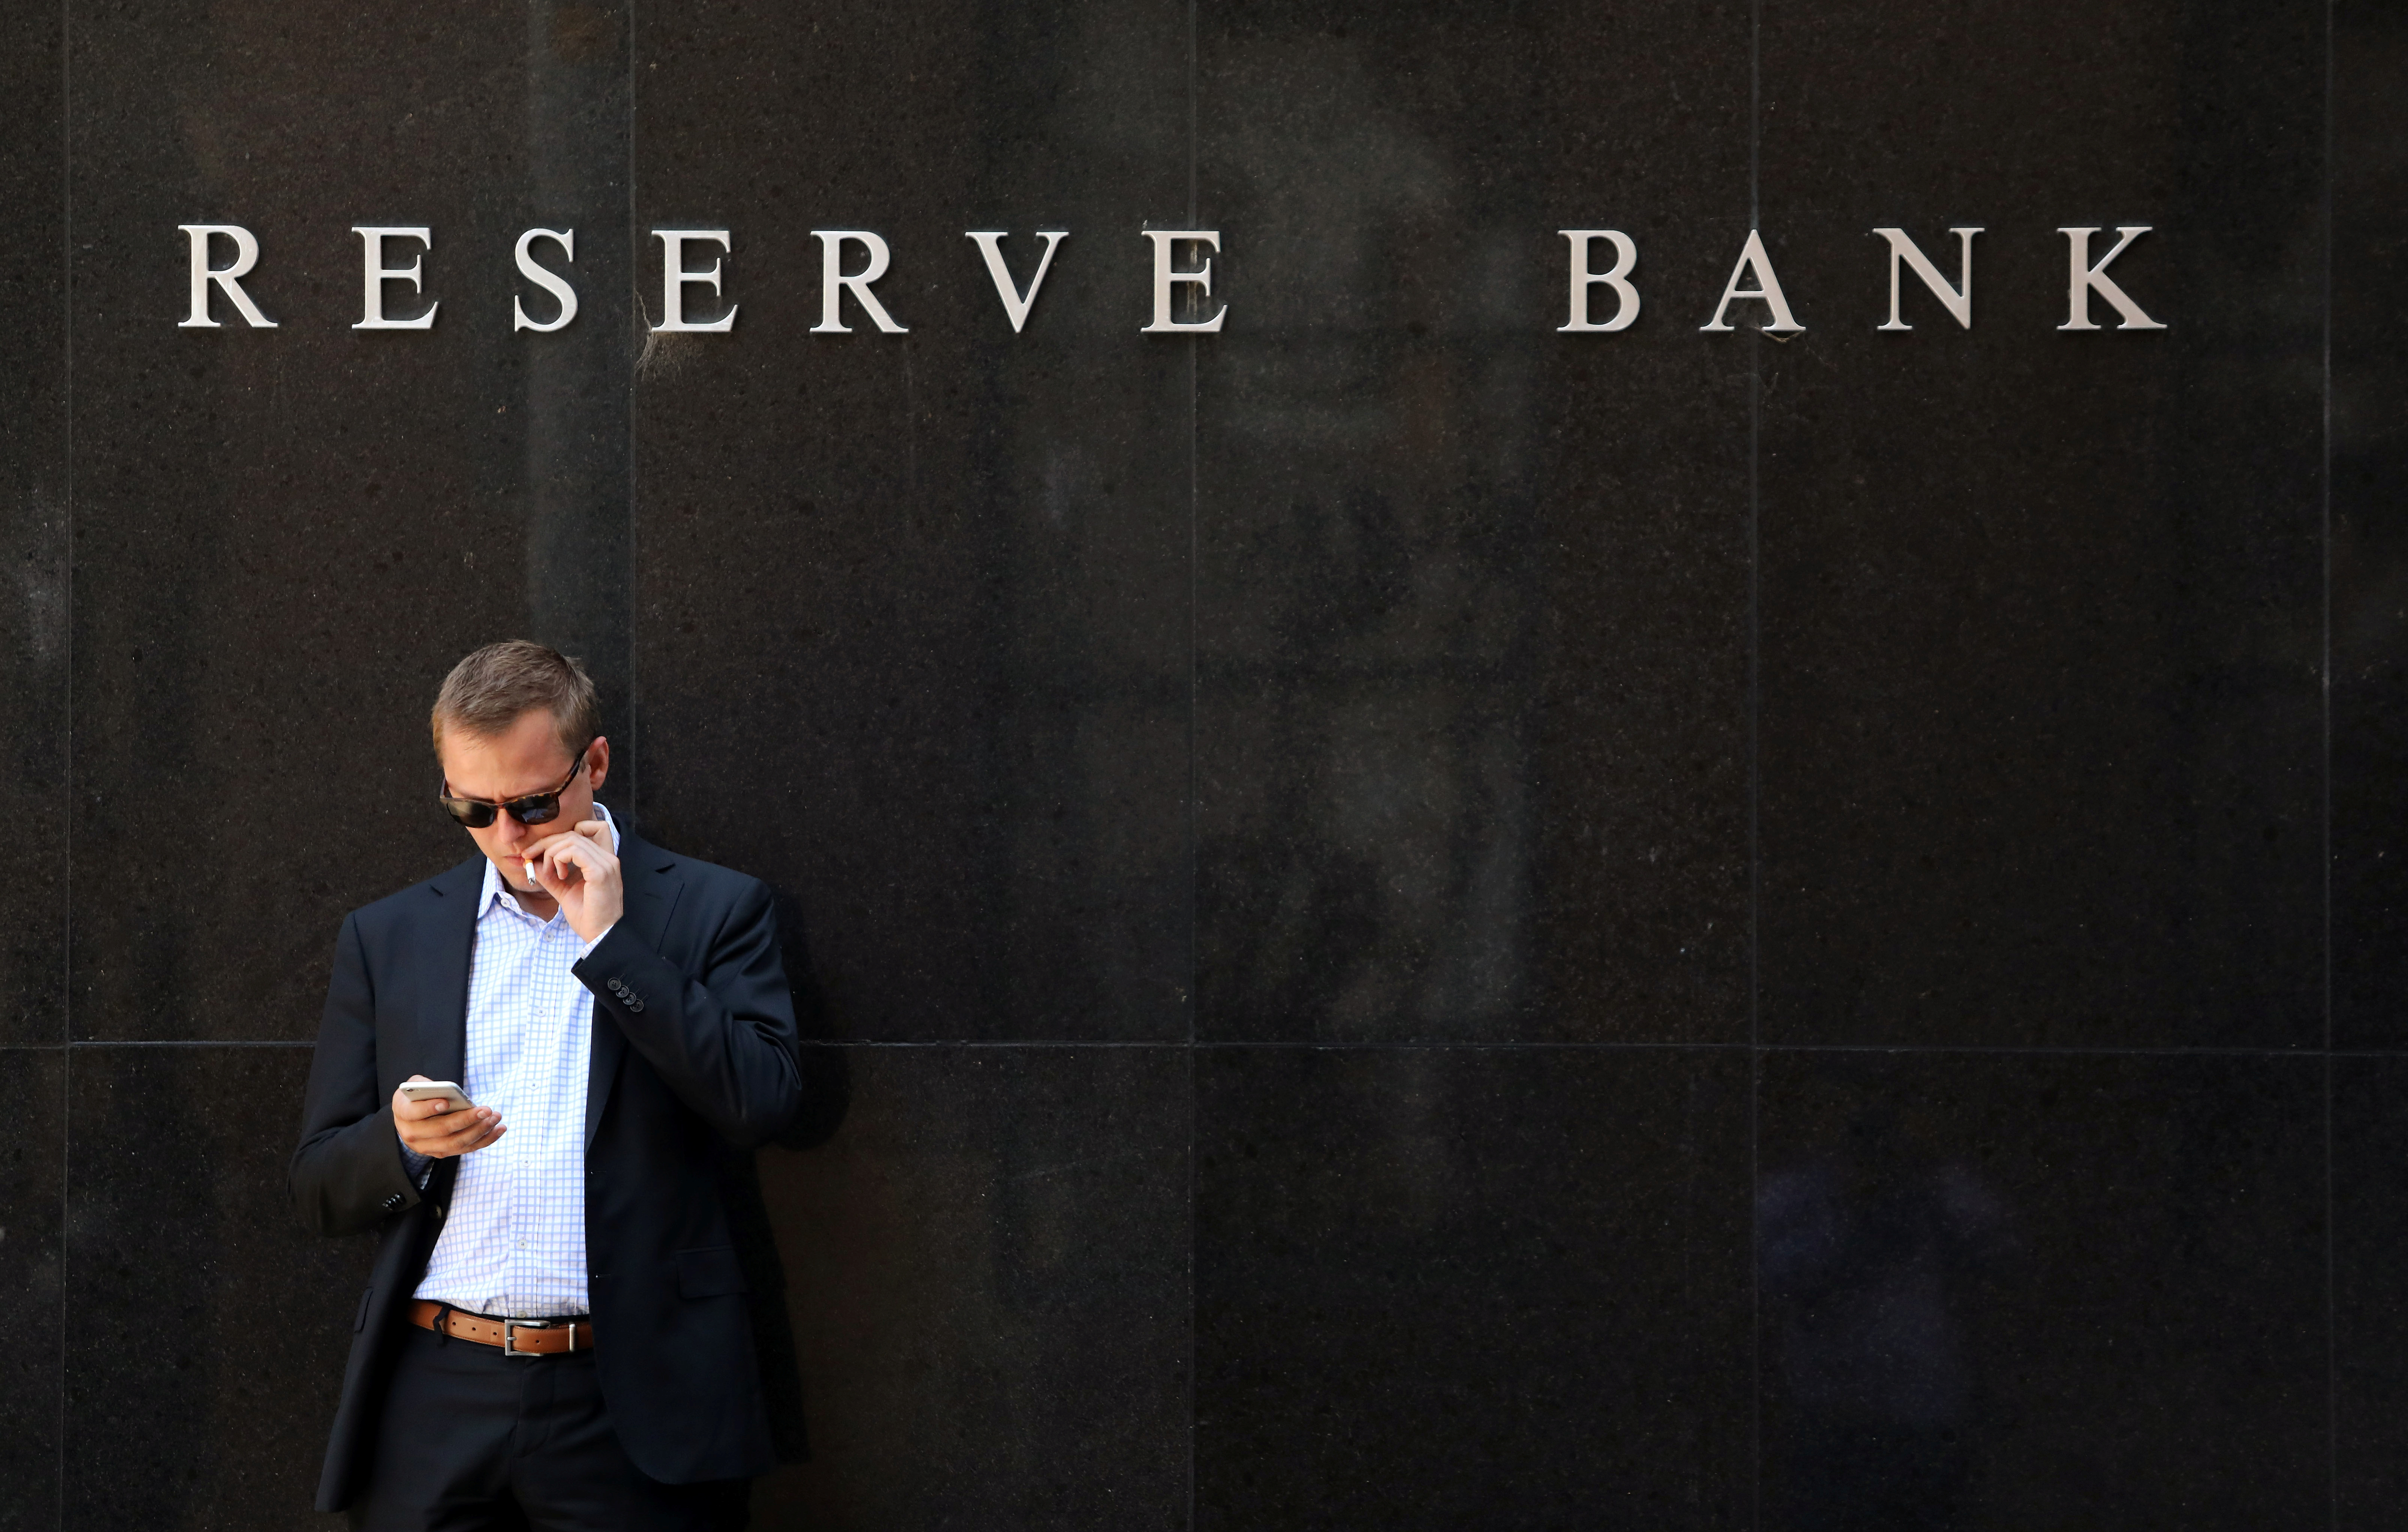 A man smokes next to the Reserve Bank of Australia headquarters in central Sydney